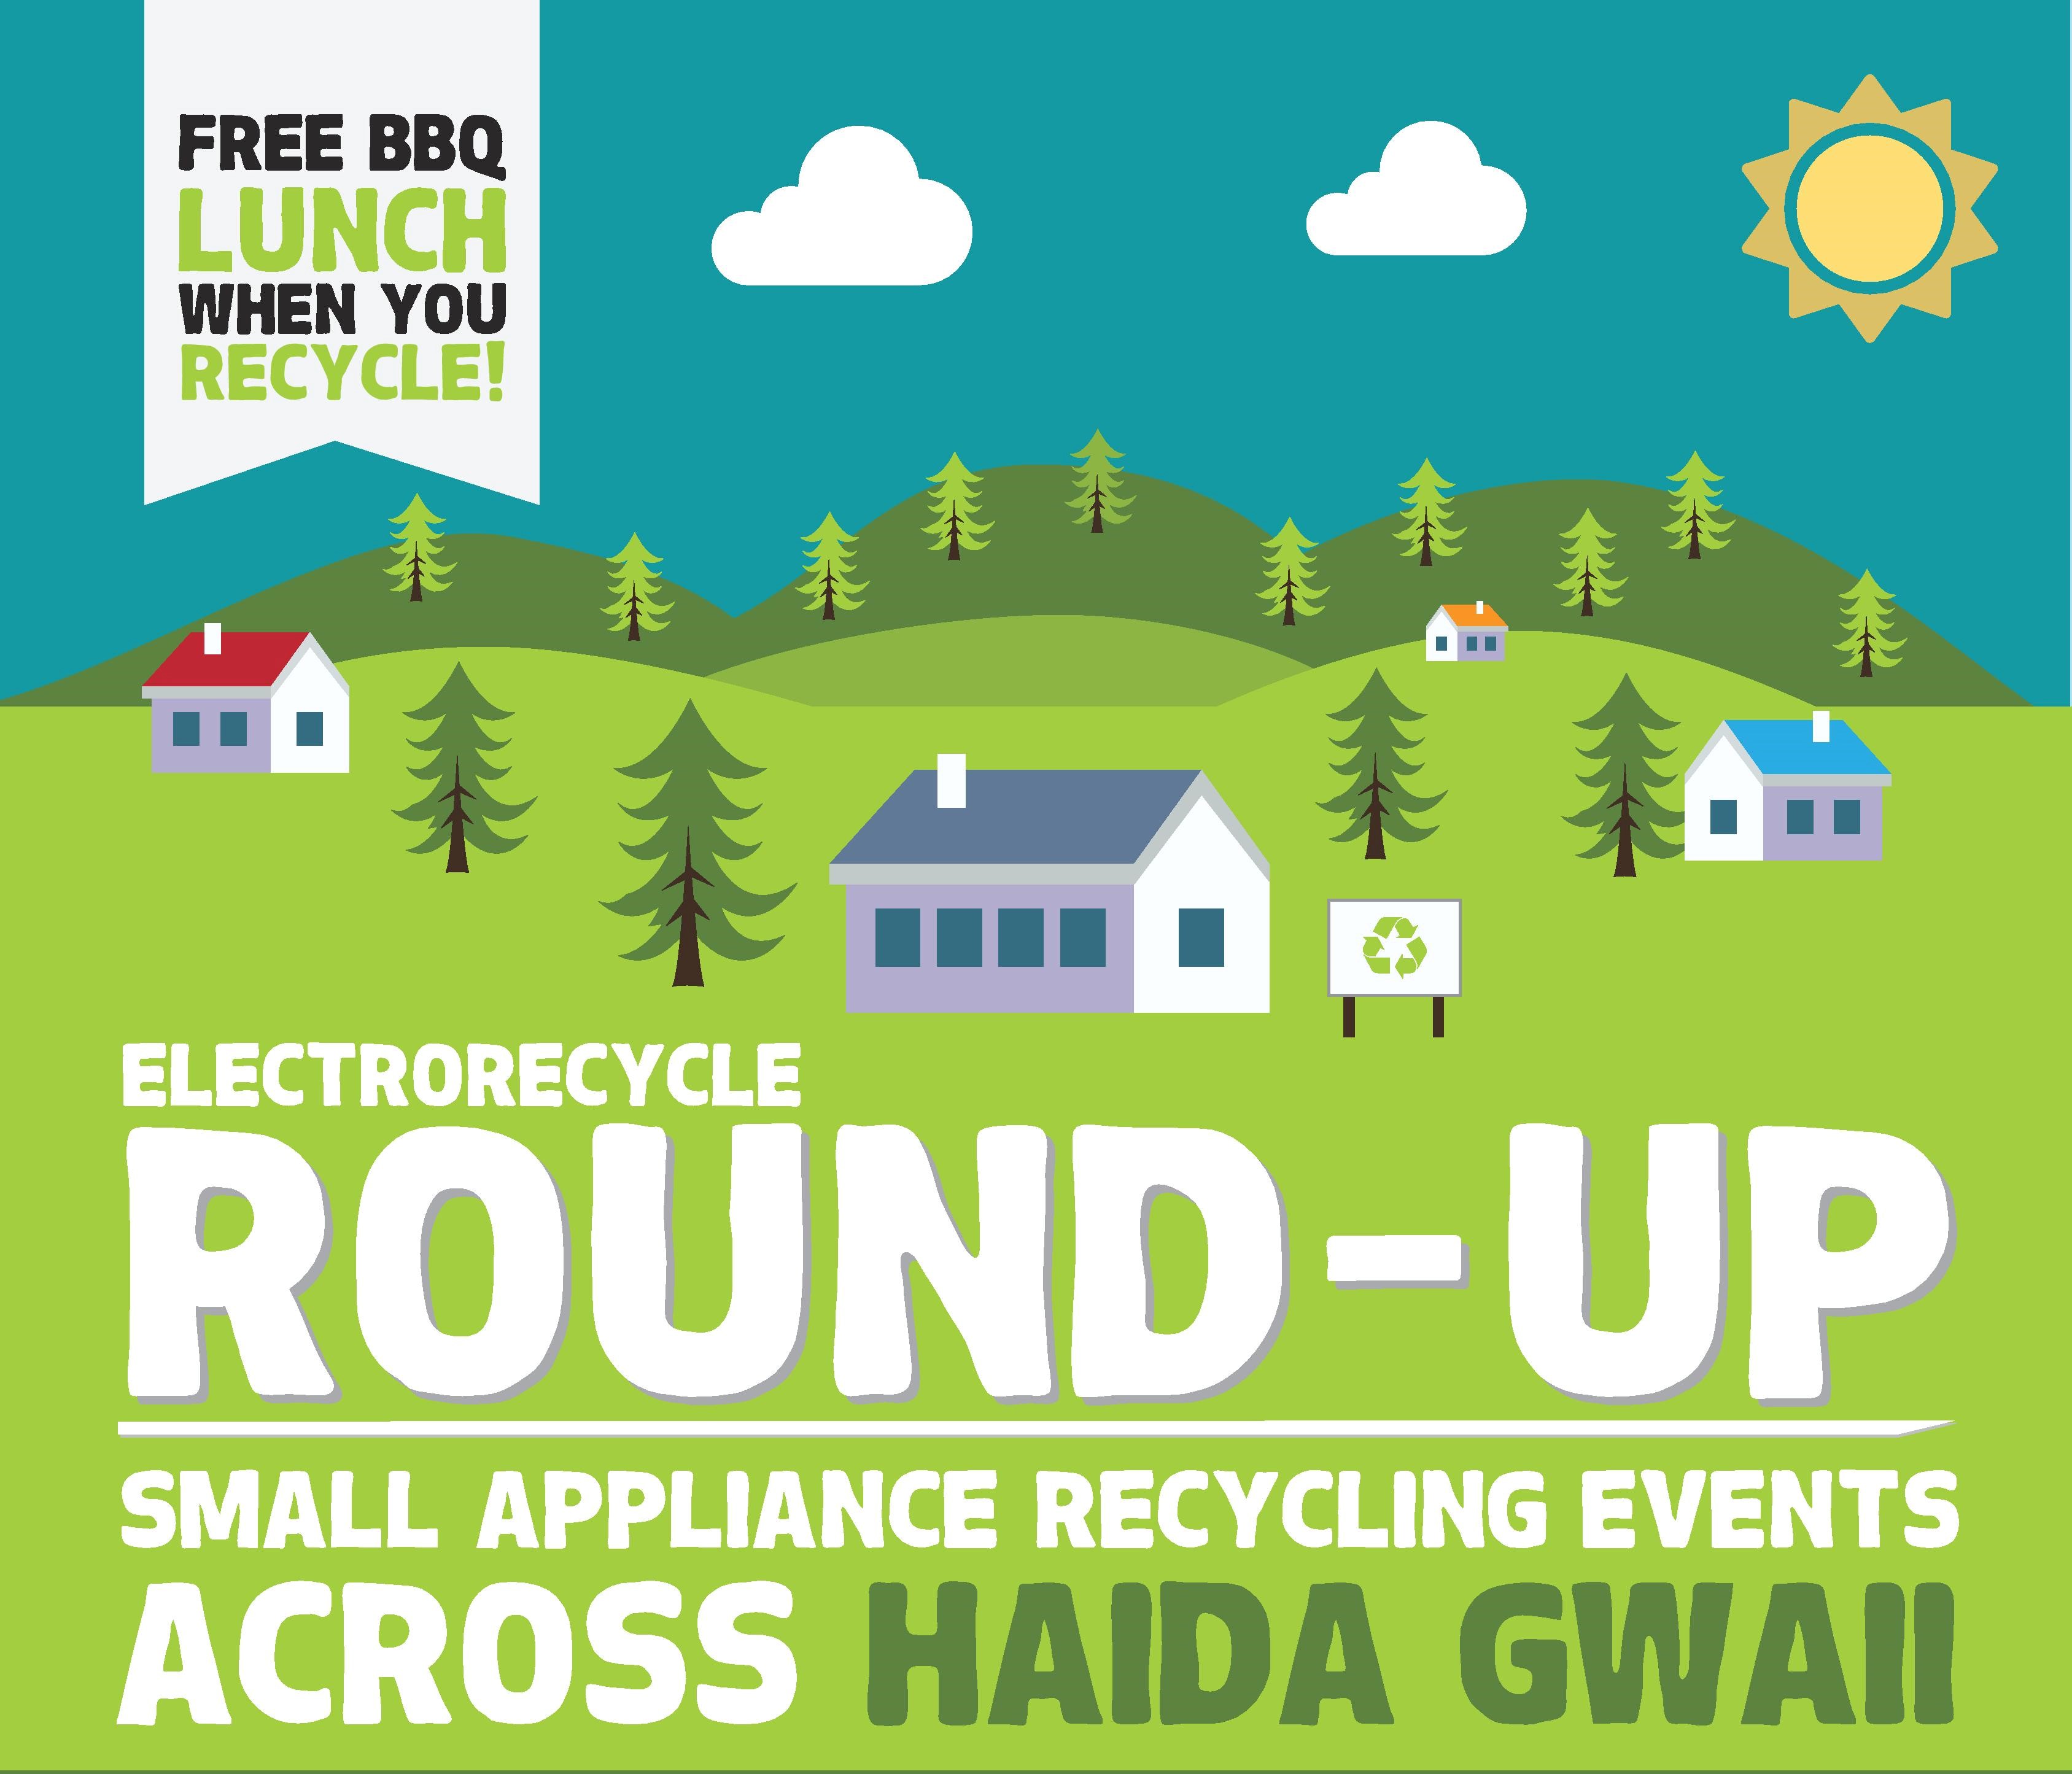 ElectroRecycle Round-up and BBQ - Queen Charlotte